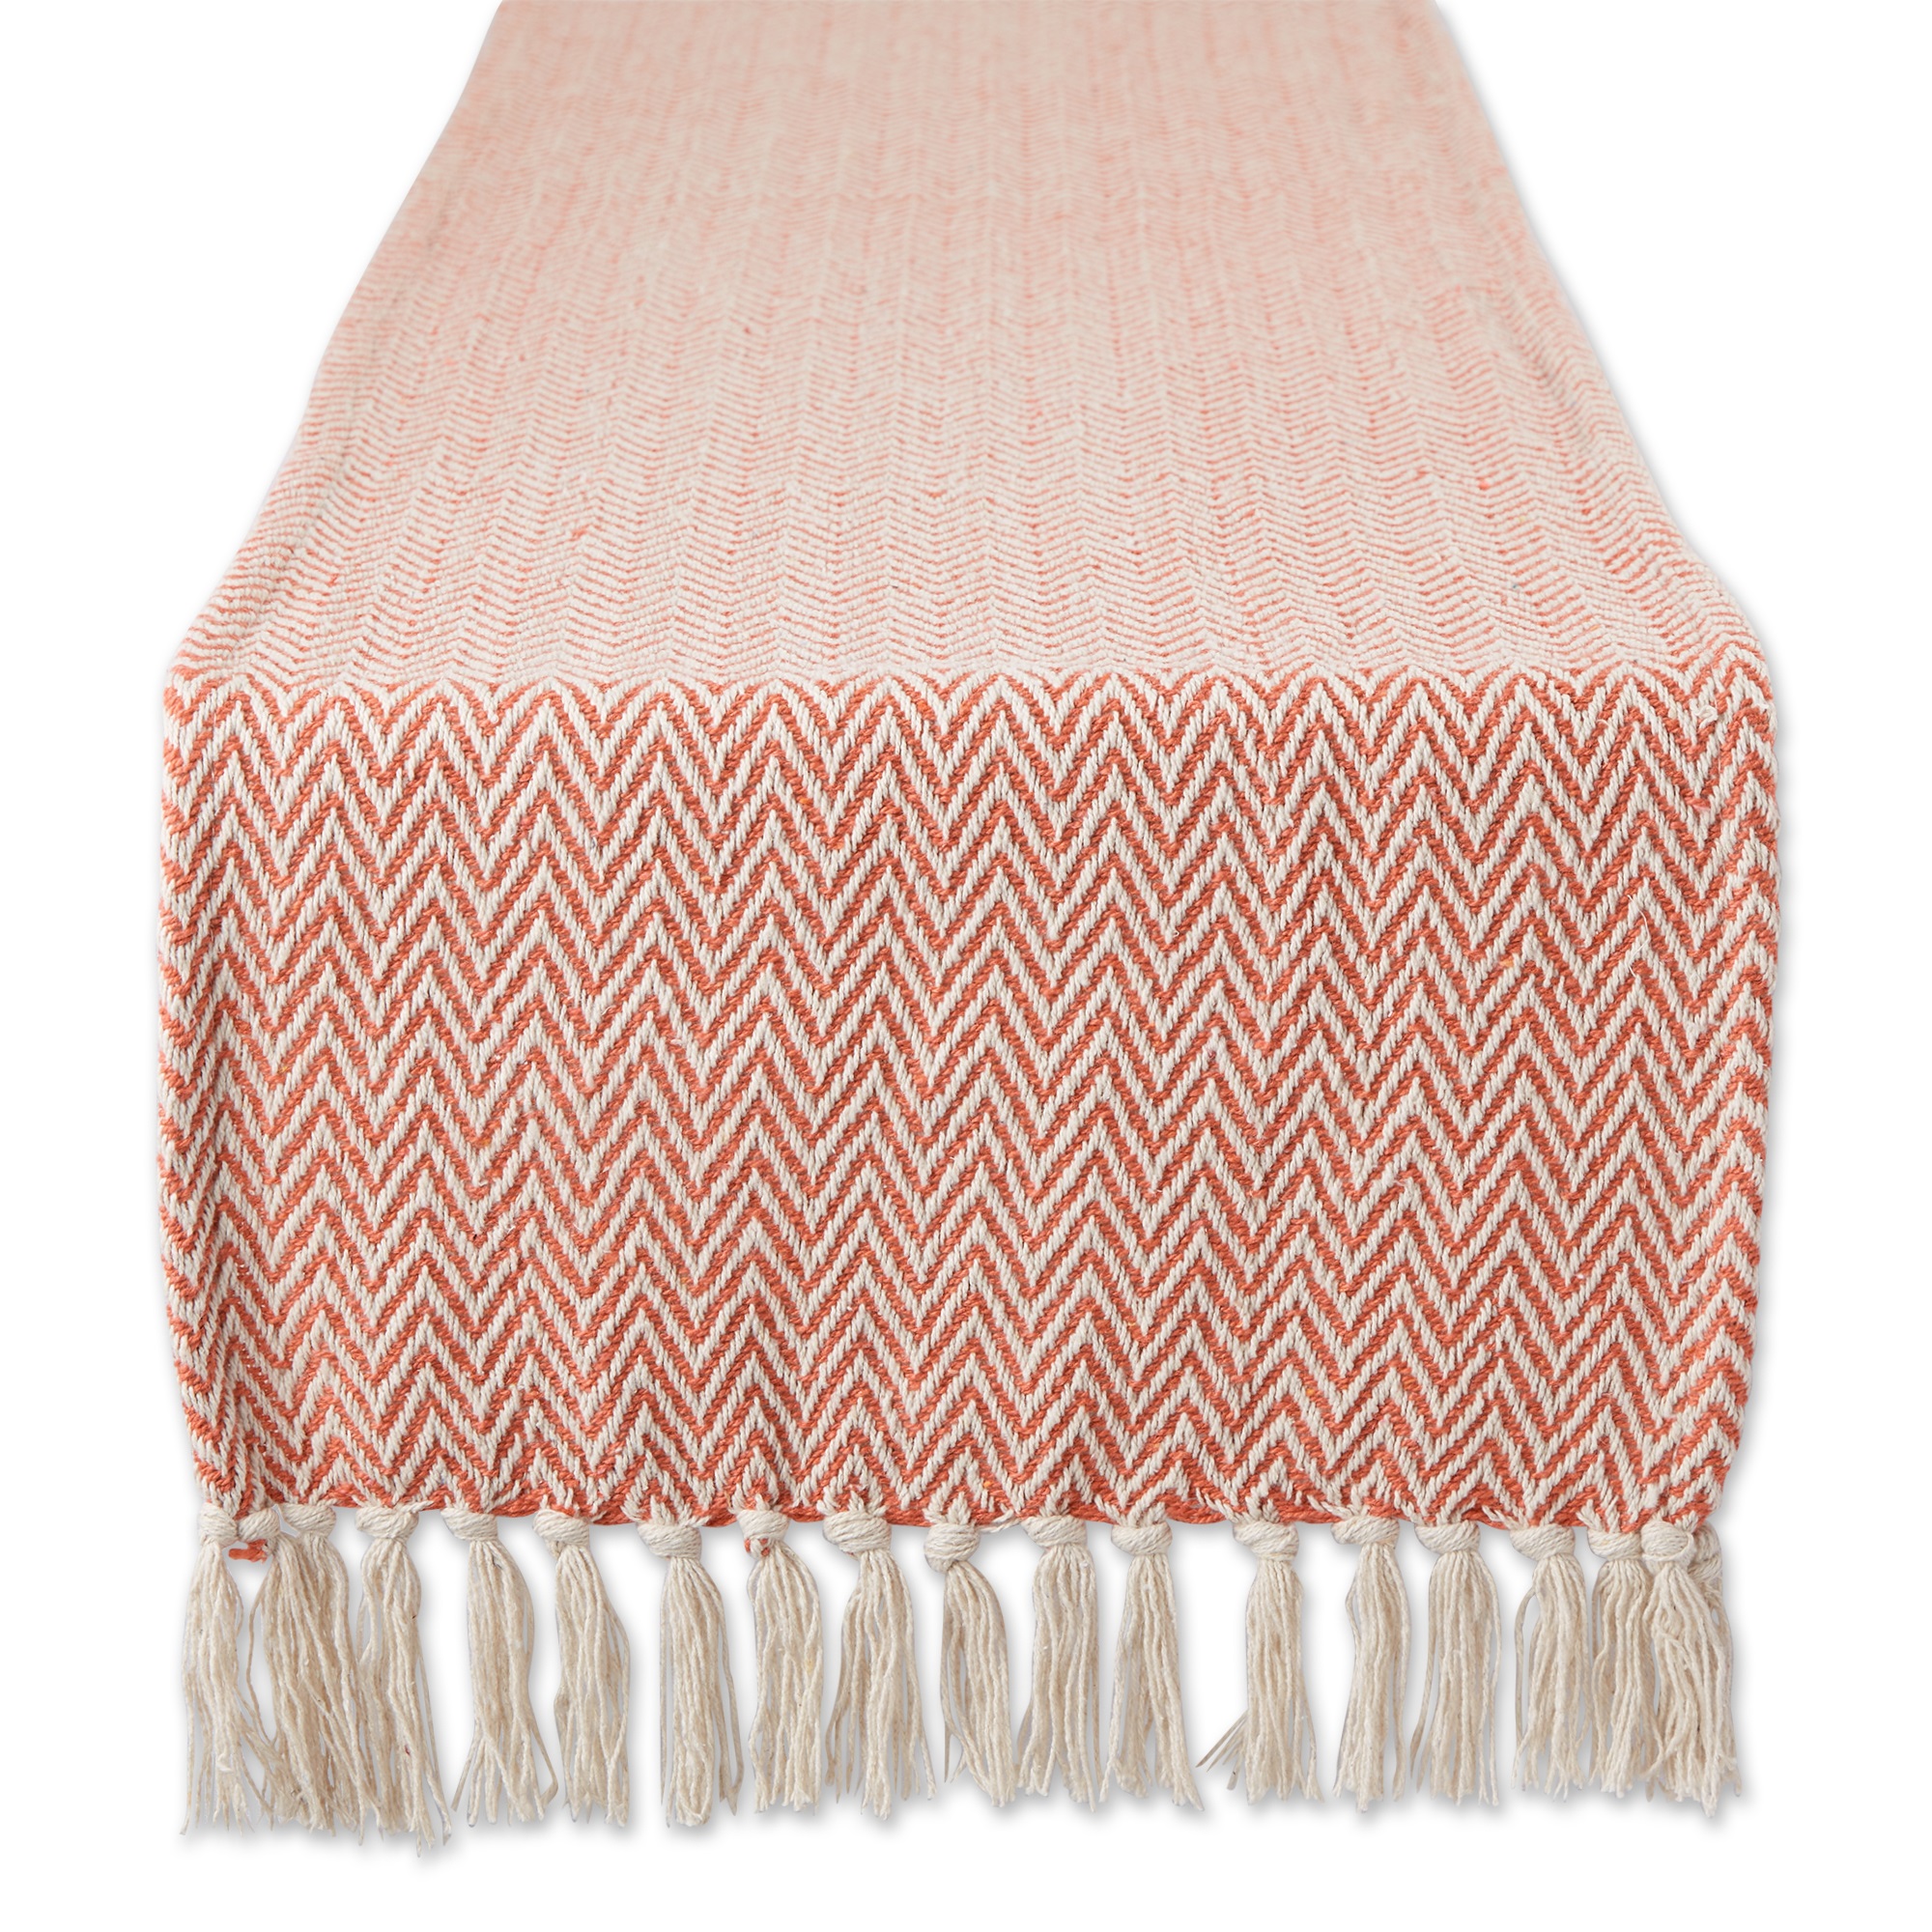 Design Imports DII Spice Chevron Table Runner 15x72